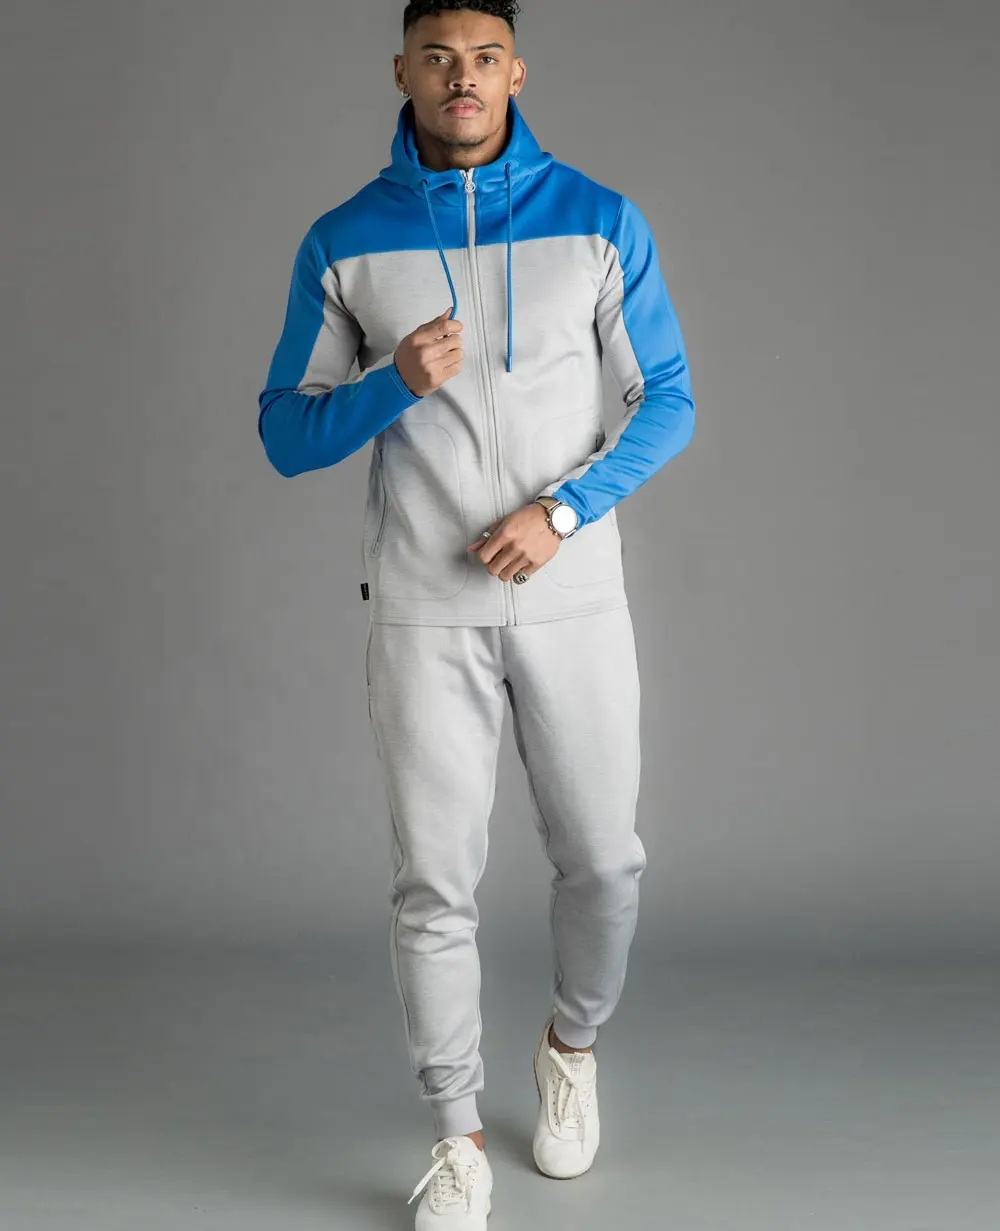 mens fashion velour tracksuit private label tracksuit manufacture by About Apparels